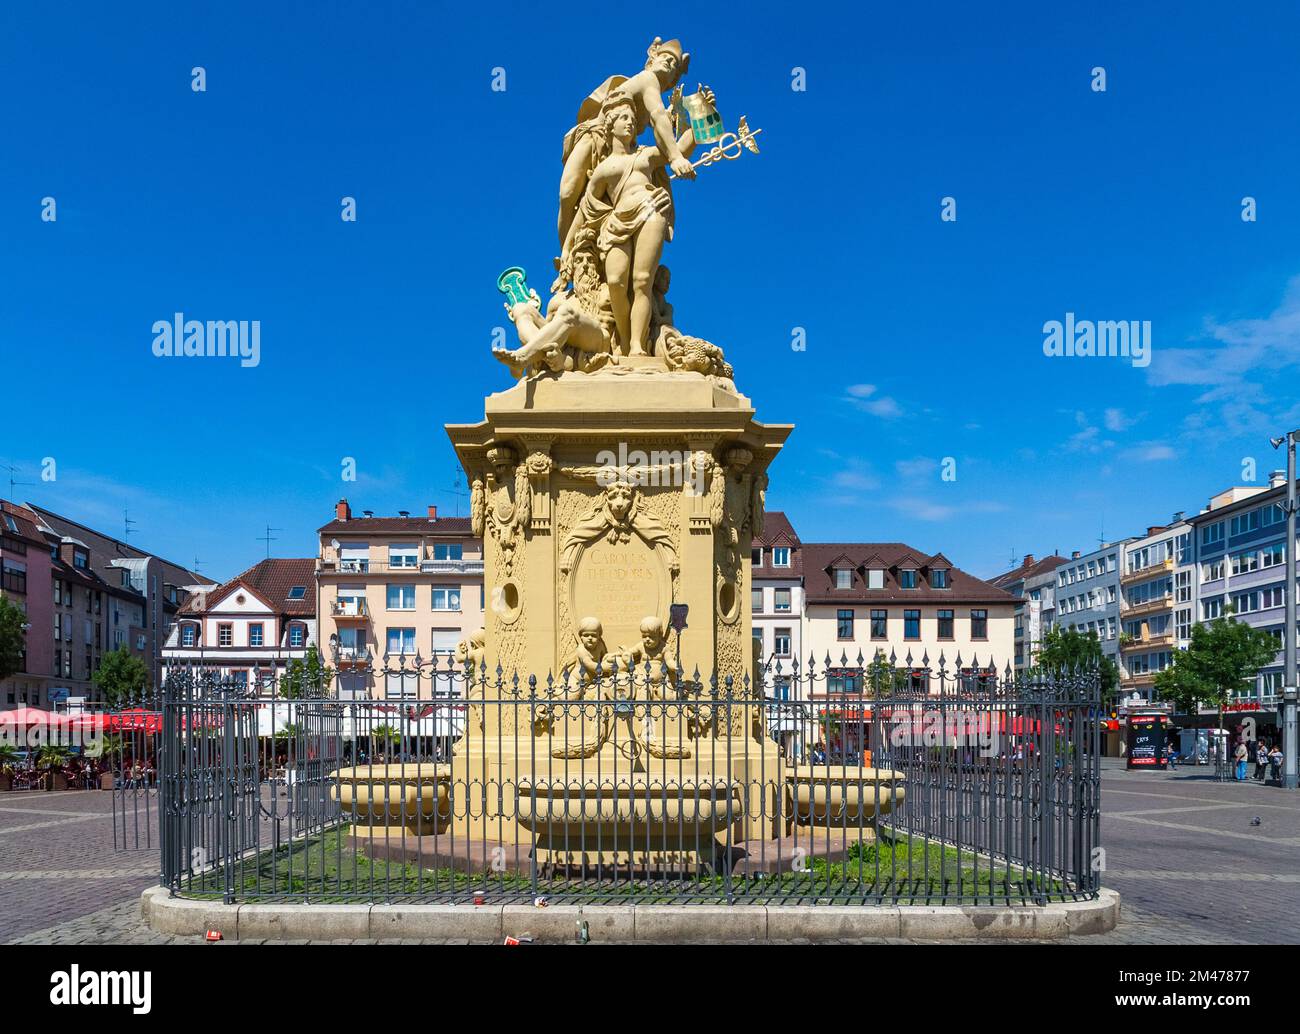 Lovely view of the market square fountain on the Mannheim market square in Germany. The city goddess holds a map of Mannheim in her left hand and is... Stock Photo